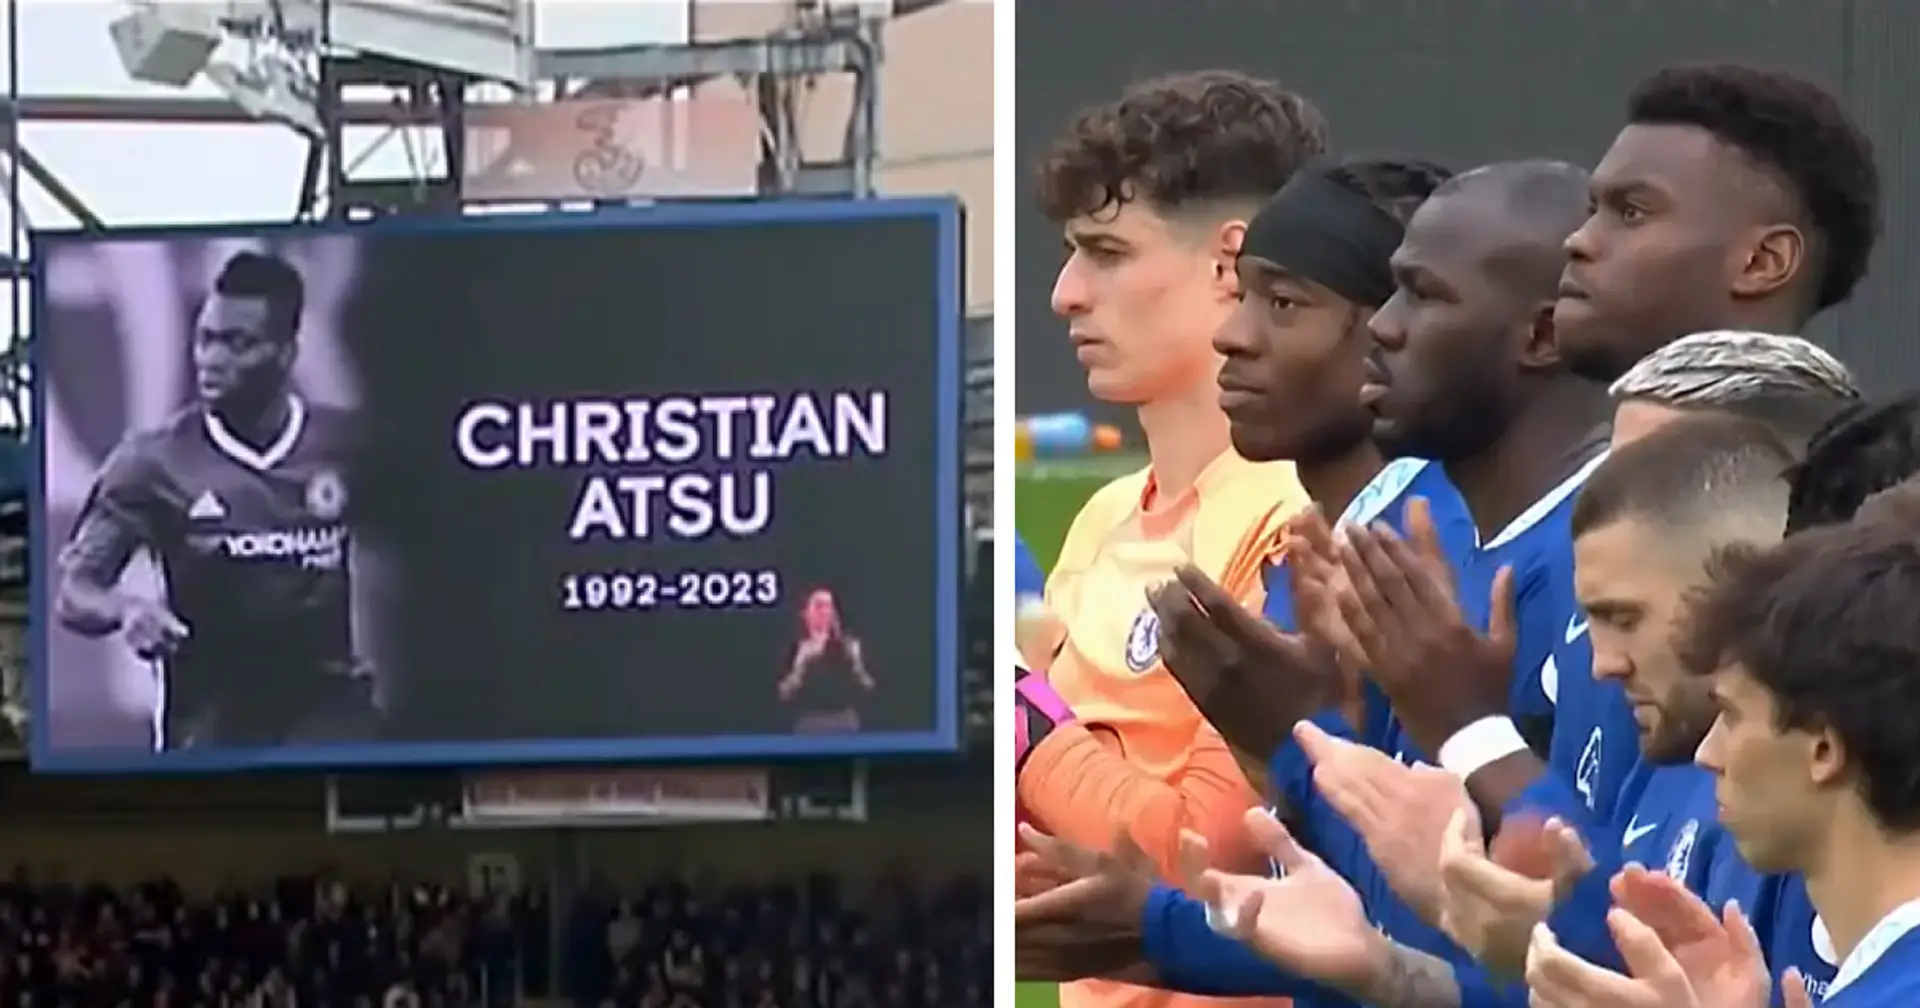 Chelsea pay tribute to late Christian Atsu before Soton game